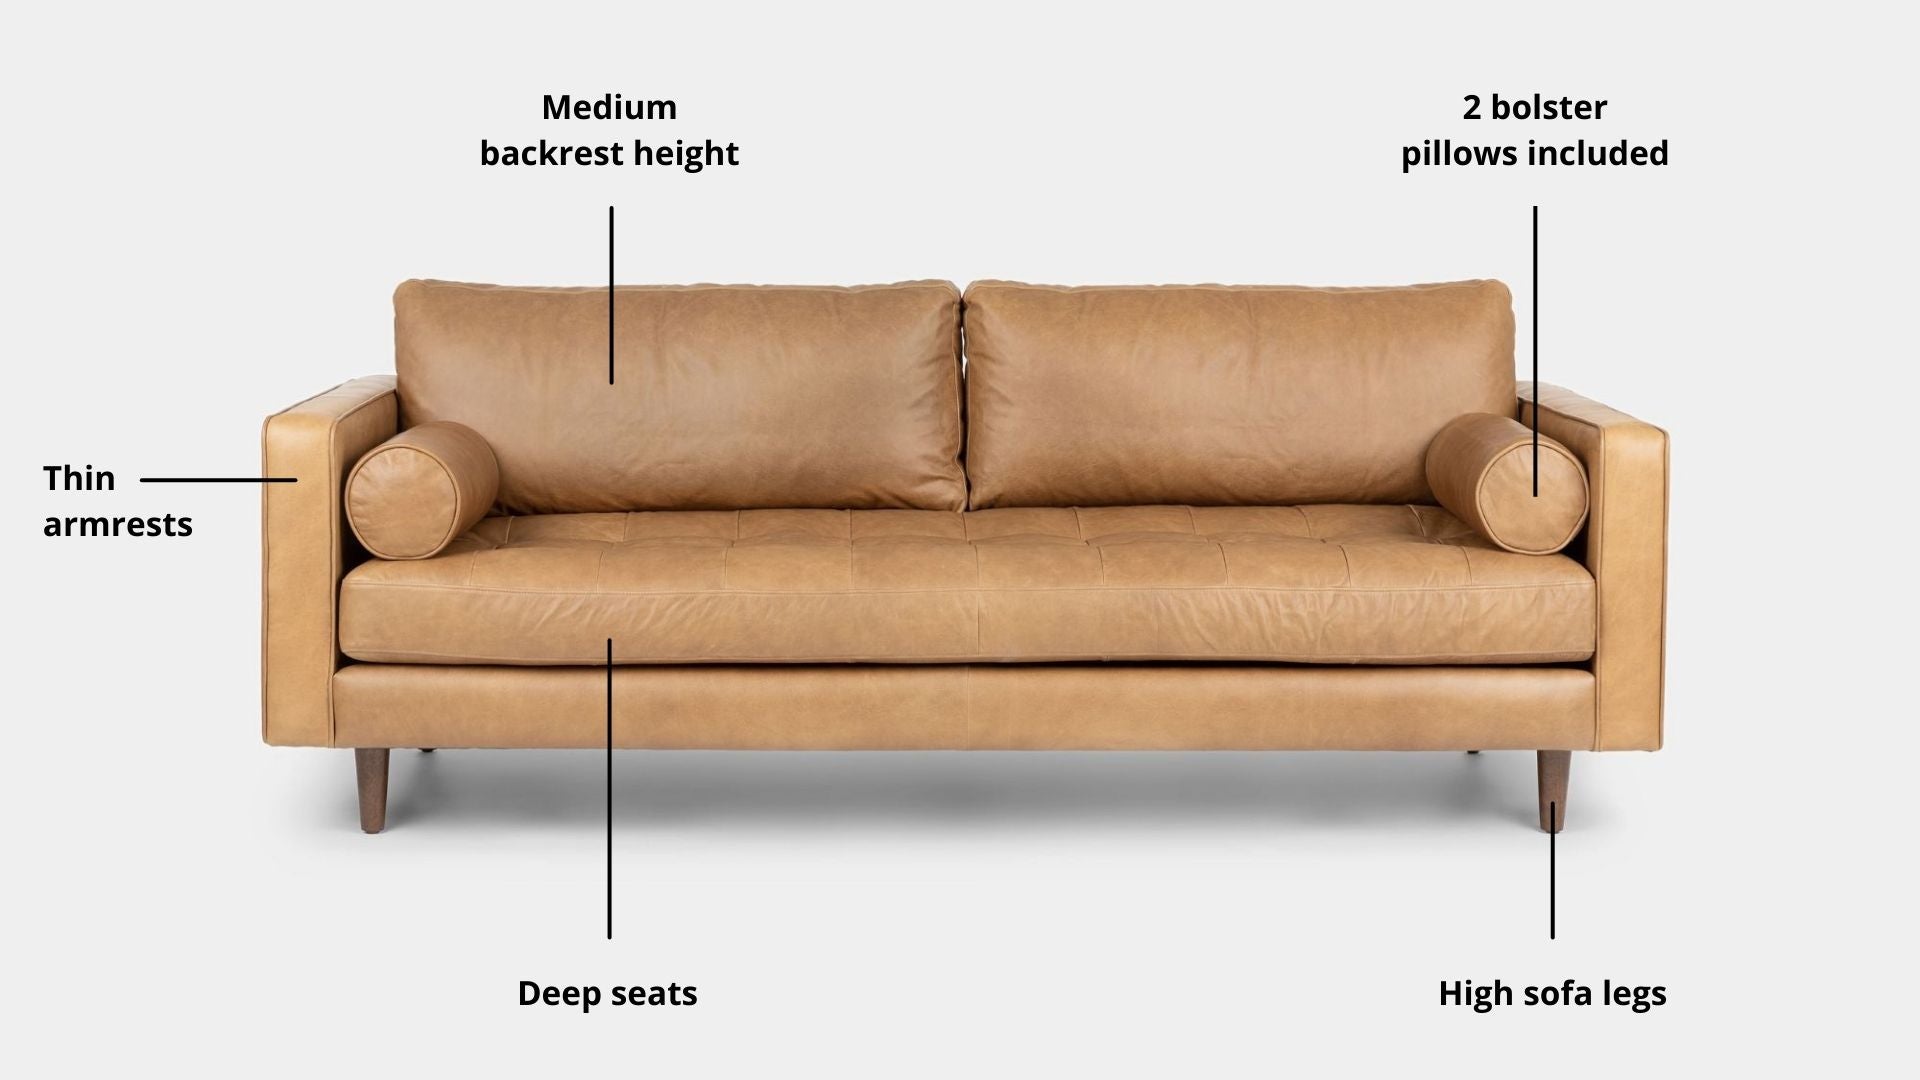 Key features such as armrest thickness, cushion height, seat depth and sofa leg height for Castle Full Leather Sofa